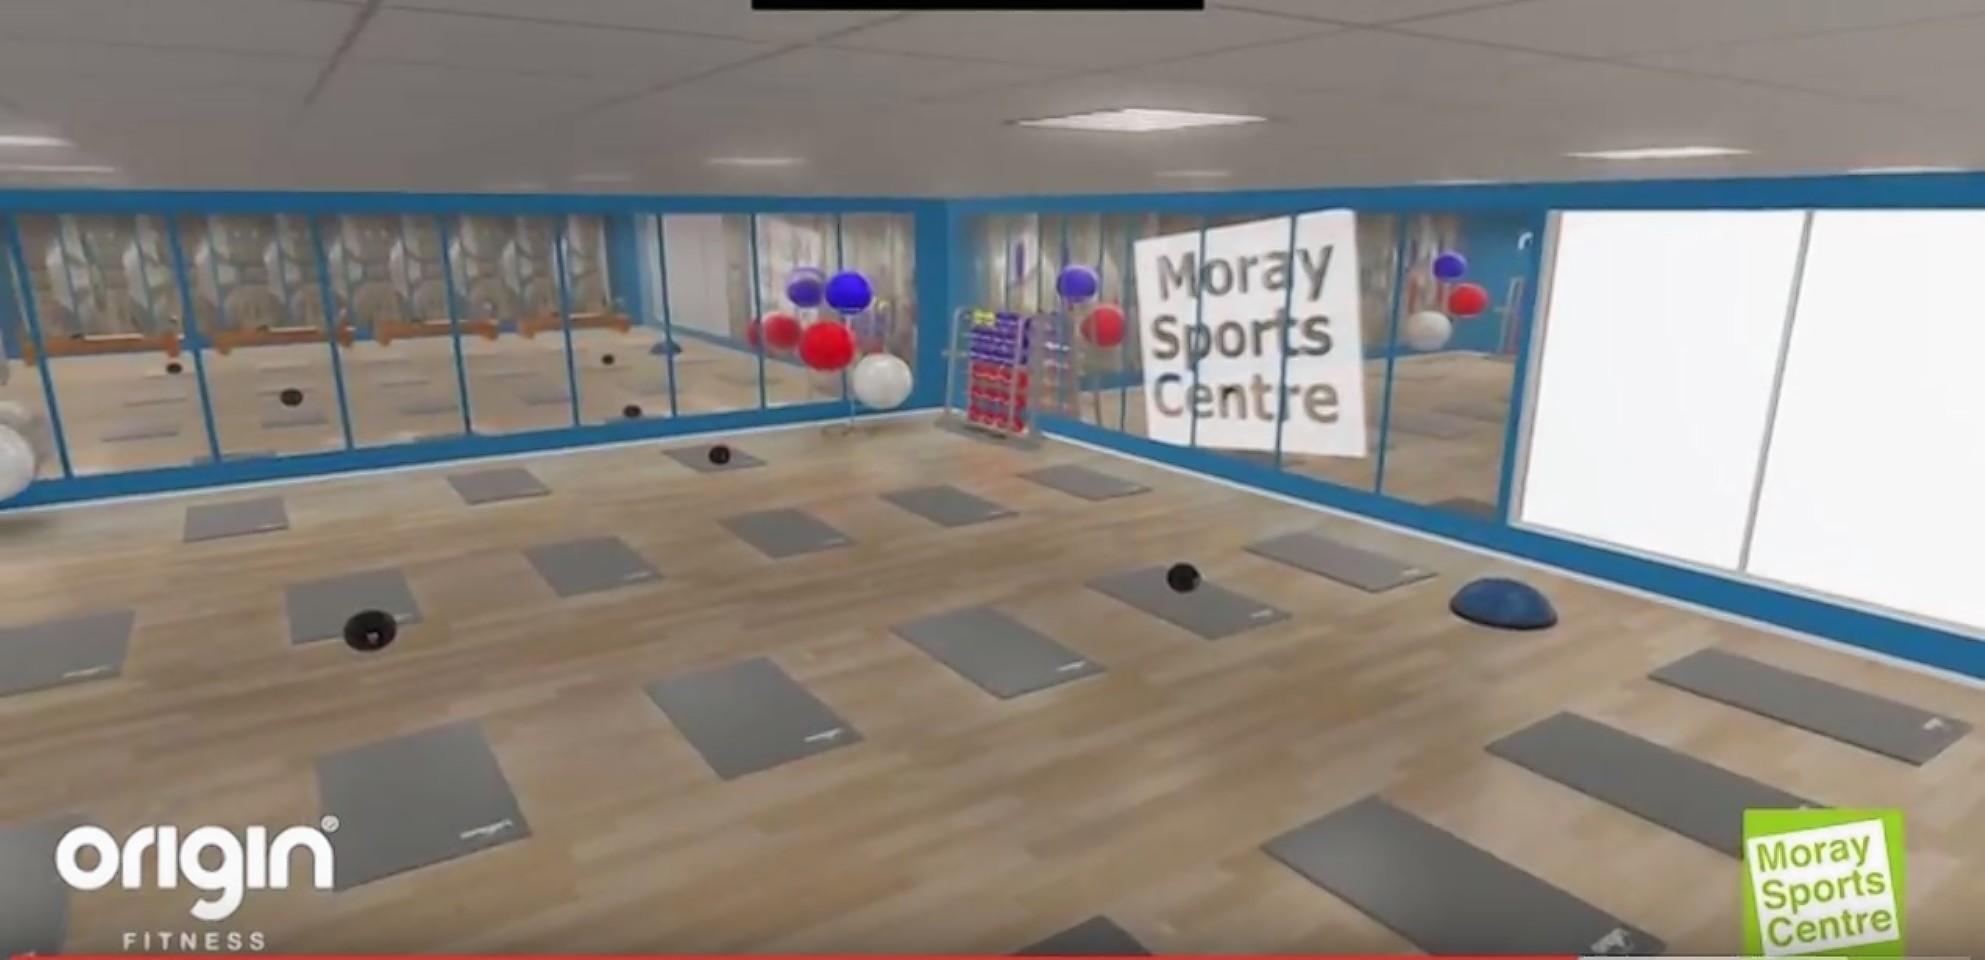 The mind and body studio has been designed for yoga, pilates and ballet.